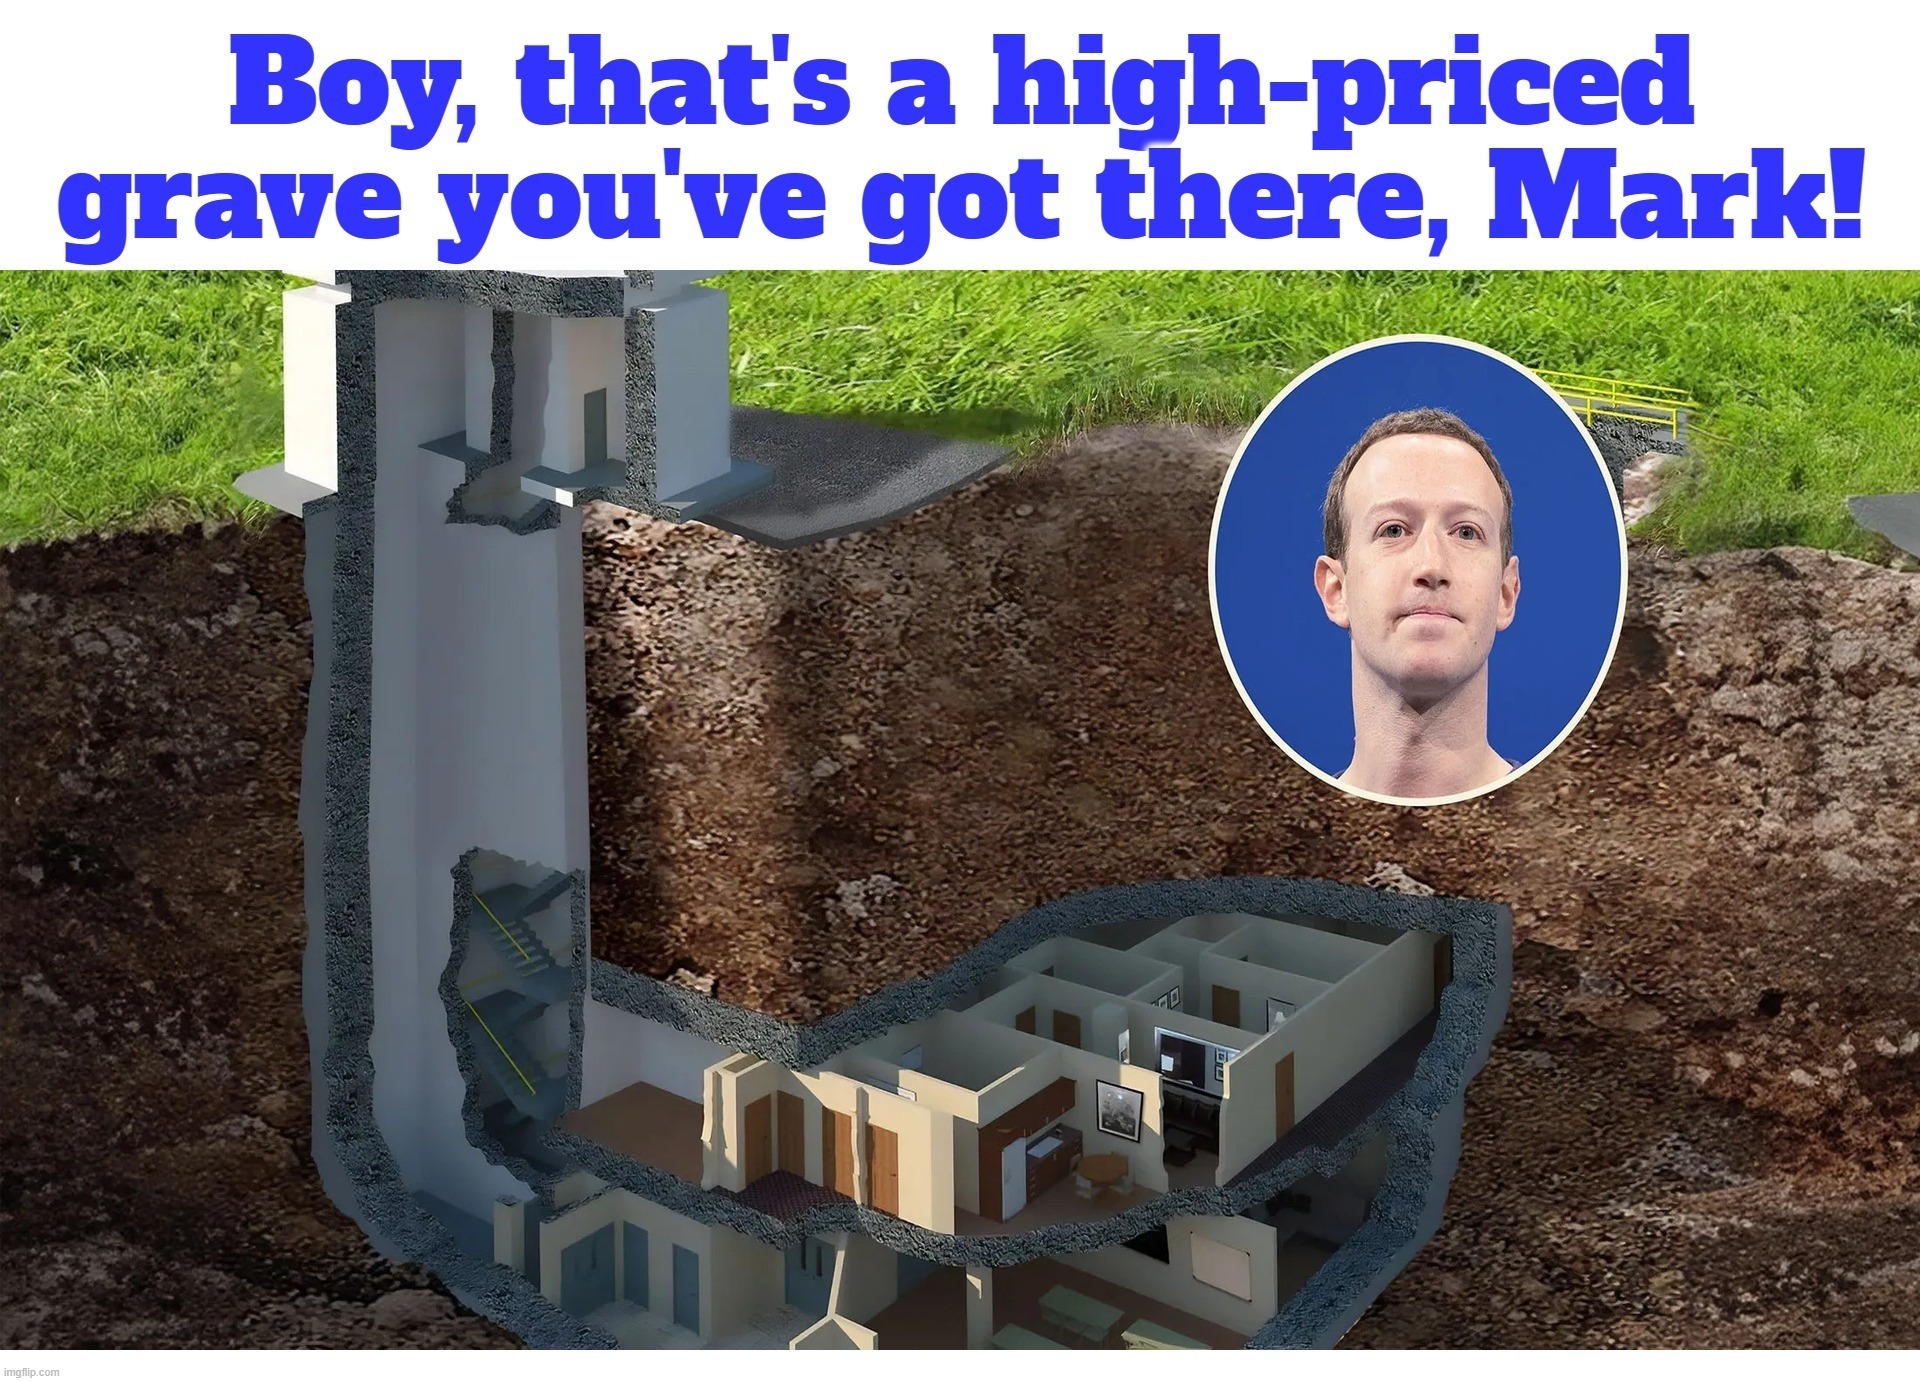 Take a Look at Mark Zuckerberg's high-priced grave! | image tagged in mark zuckerberg,doomsday bunker,doomsday,graveyard,mr krabs am i really going to have to defile this grave for | made w/ Imgflip meme maker